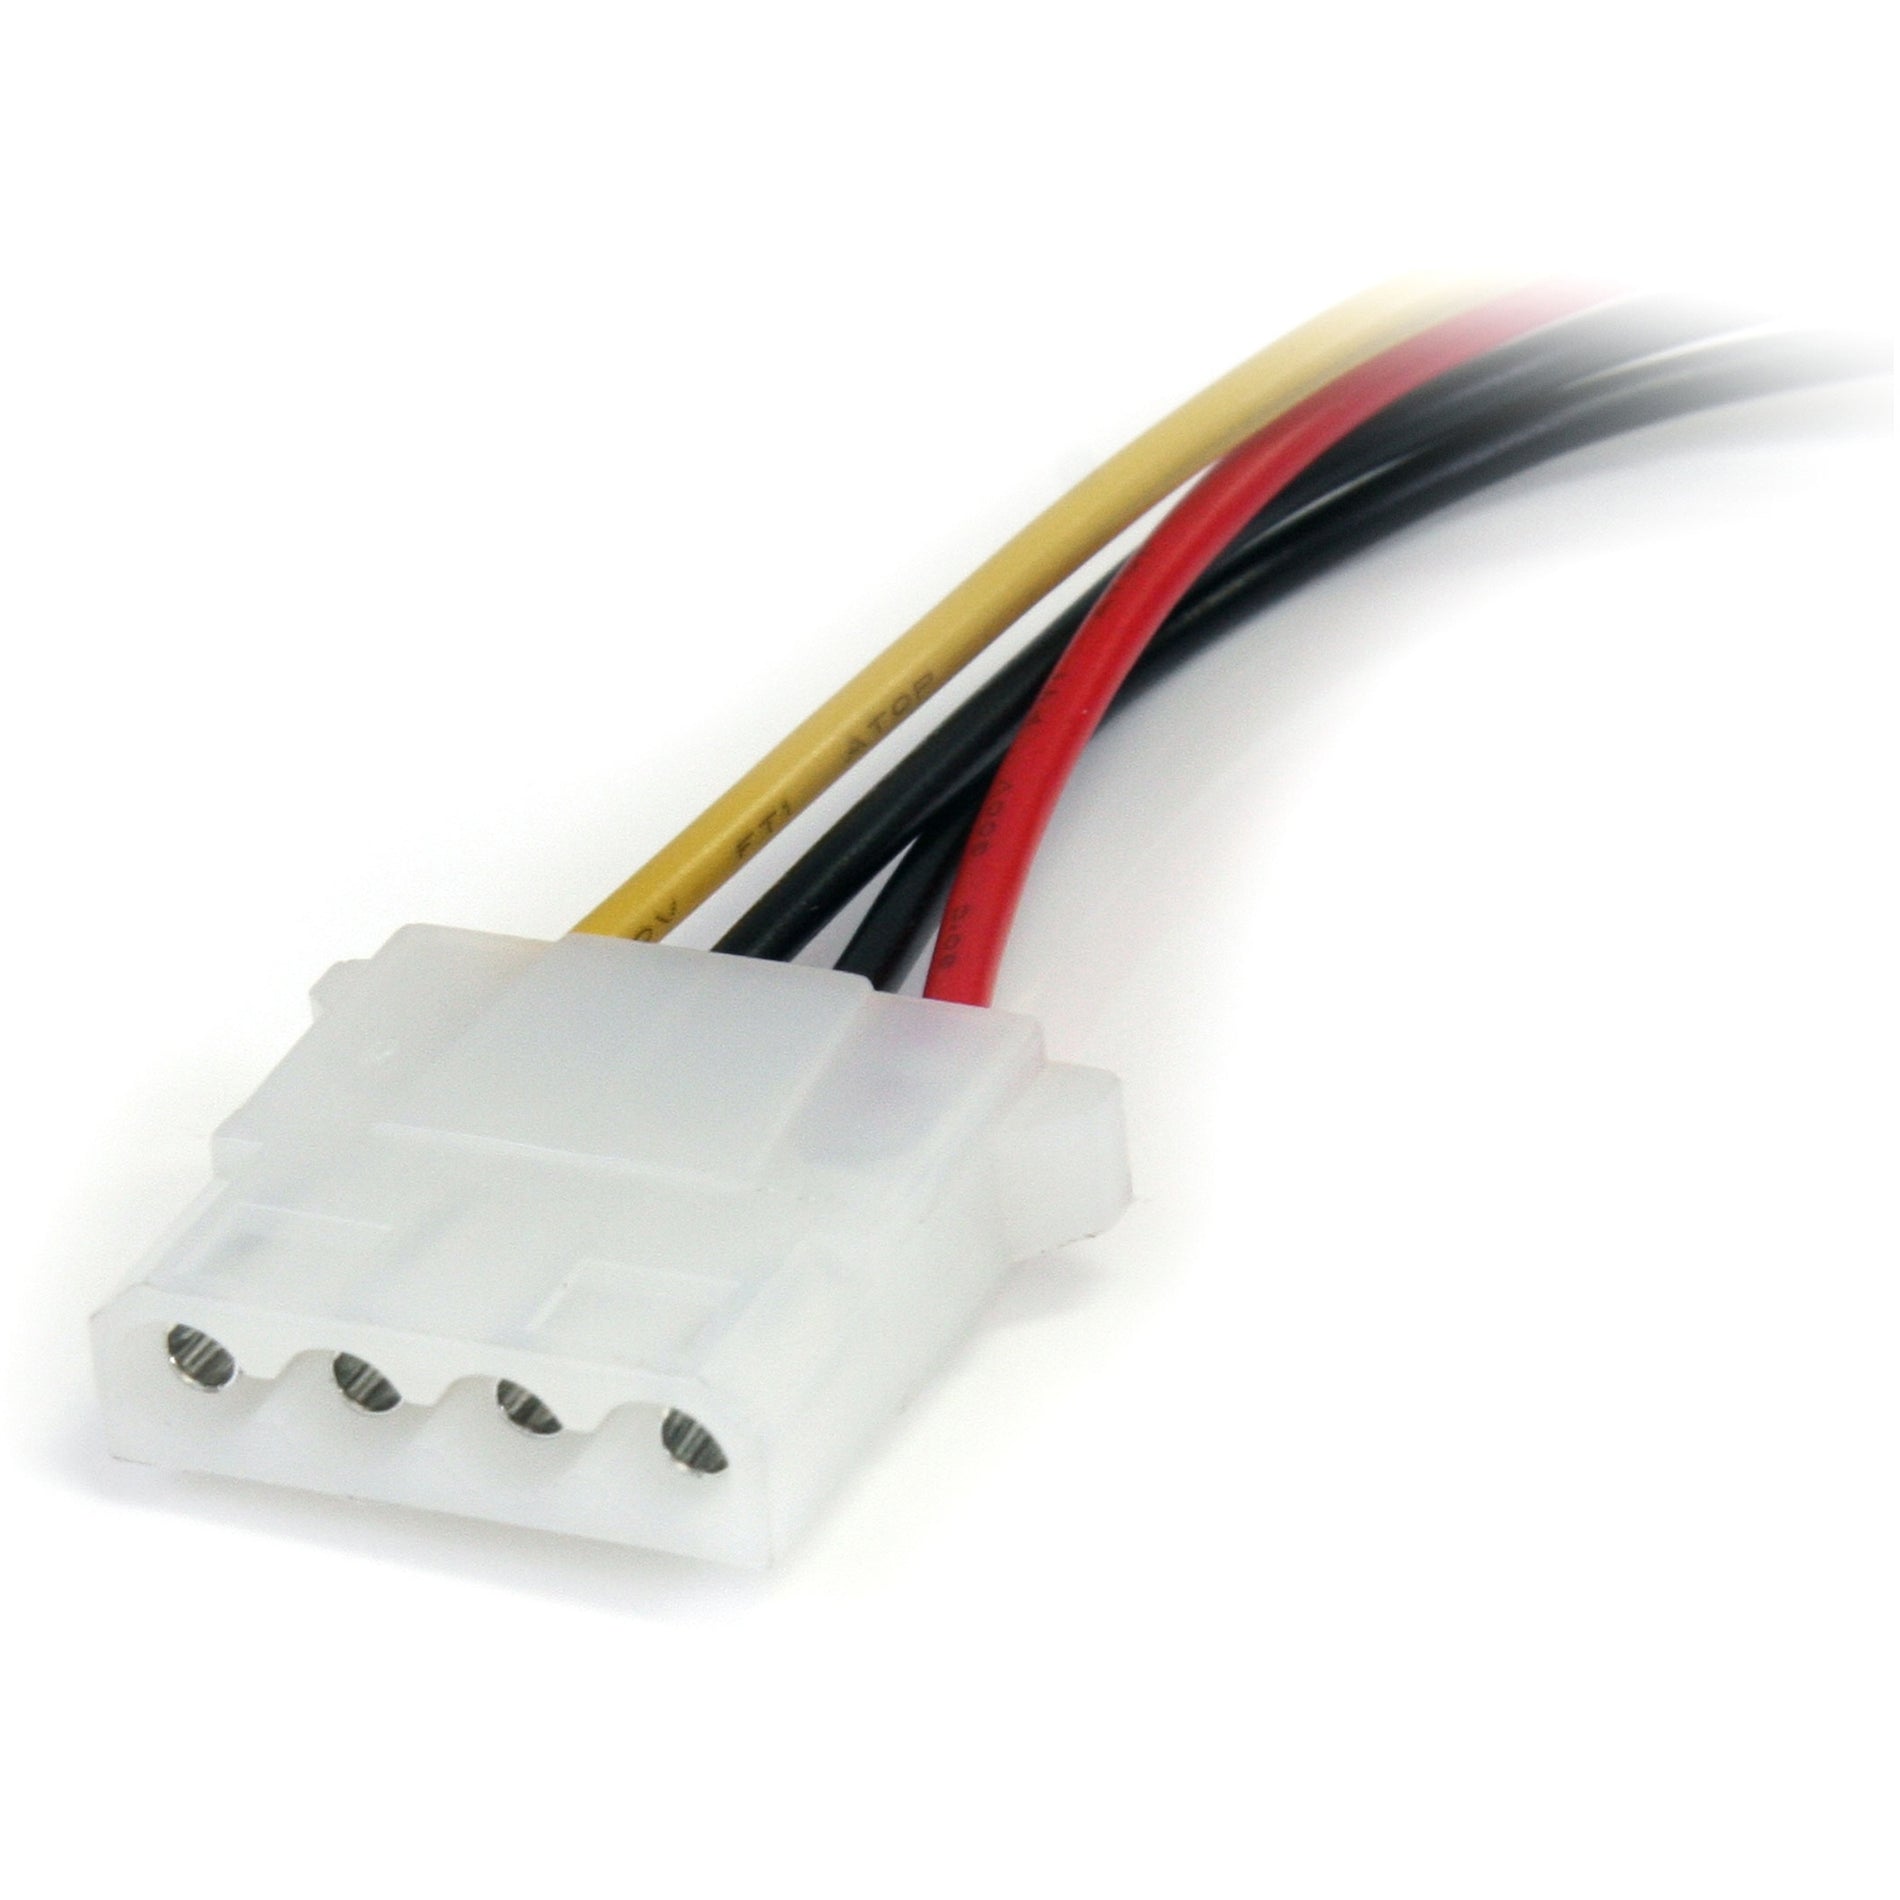 StarTech.com LP4SATAFM6IN 6in SATA to LP4 Power Cable Adapter, Easy Hard Drive Power Connection